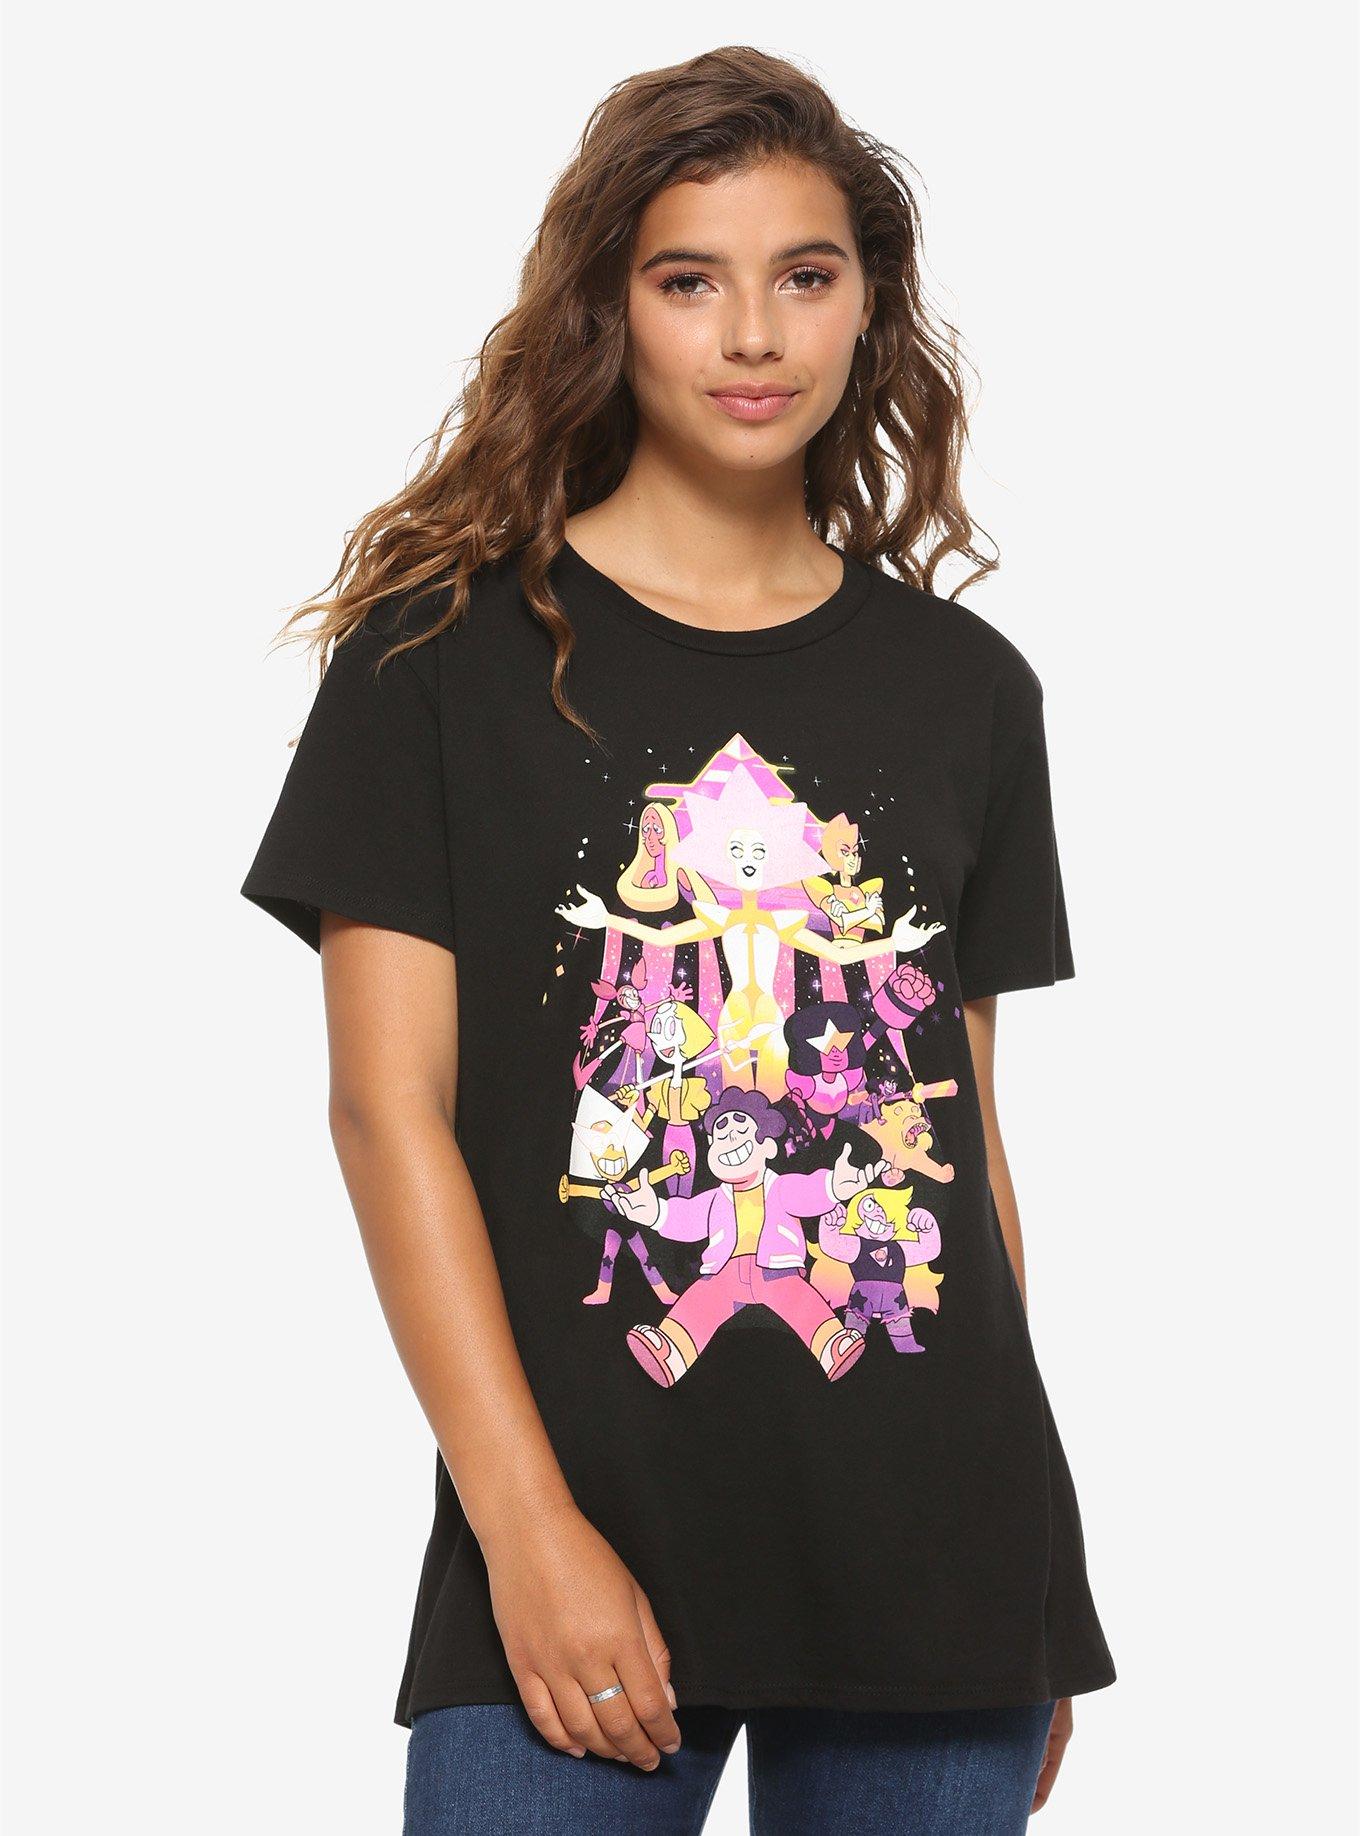 Steven Universe: The Movie Group Girls T-Shirt | Hot Topic